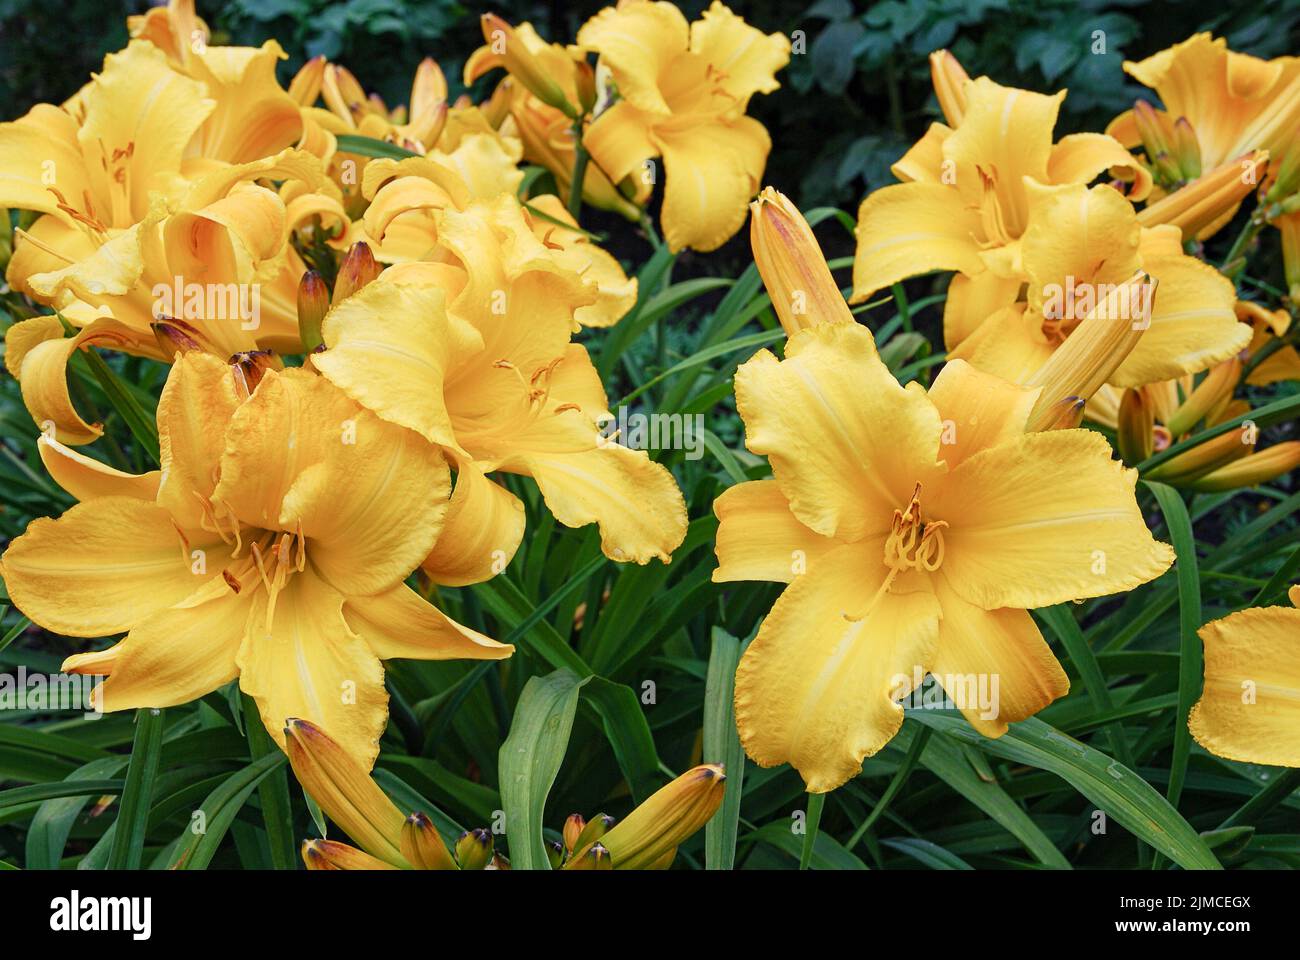 Hemerocallis day lily flowers in the garden. Dumortieri Morr or Yellow Lollypop breed Stock Photo